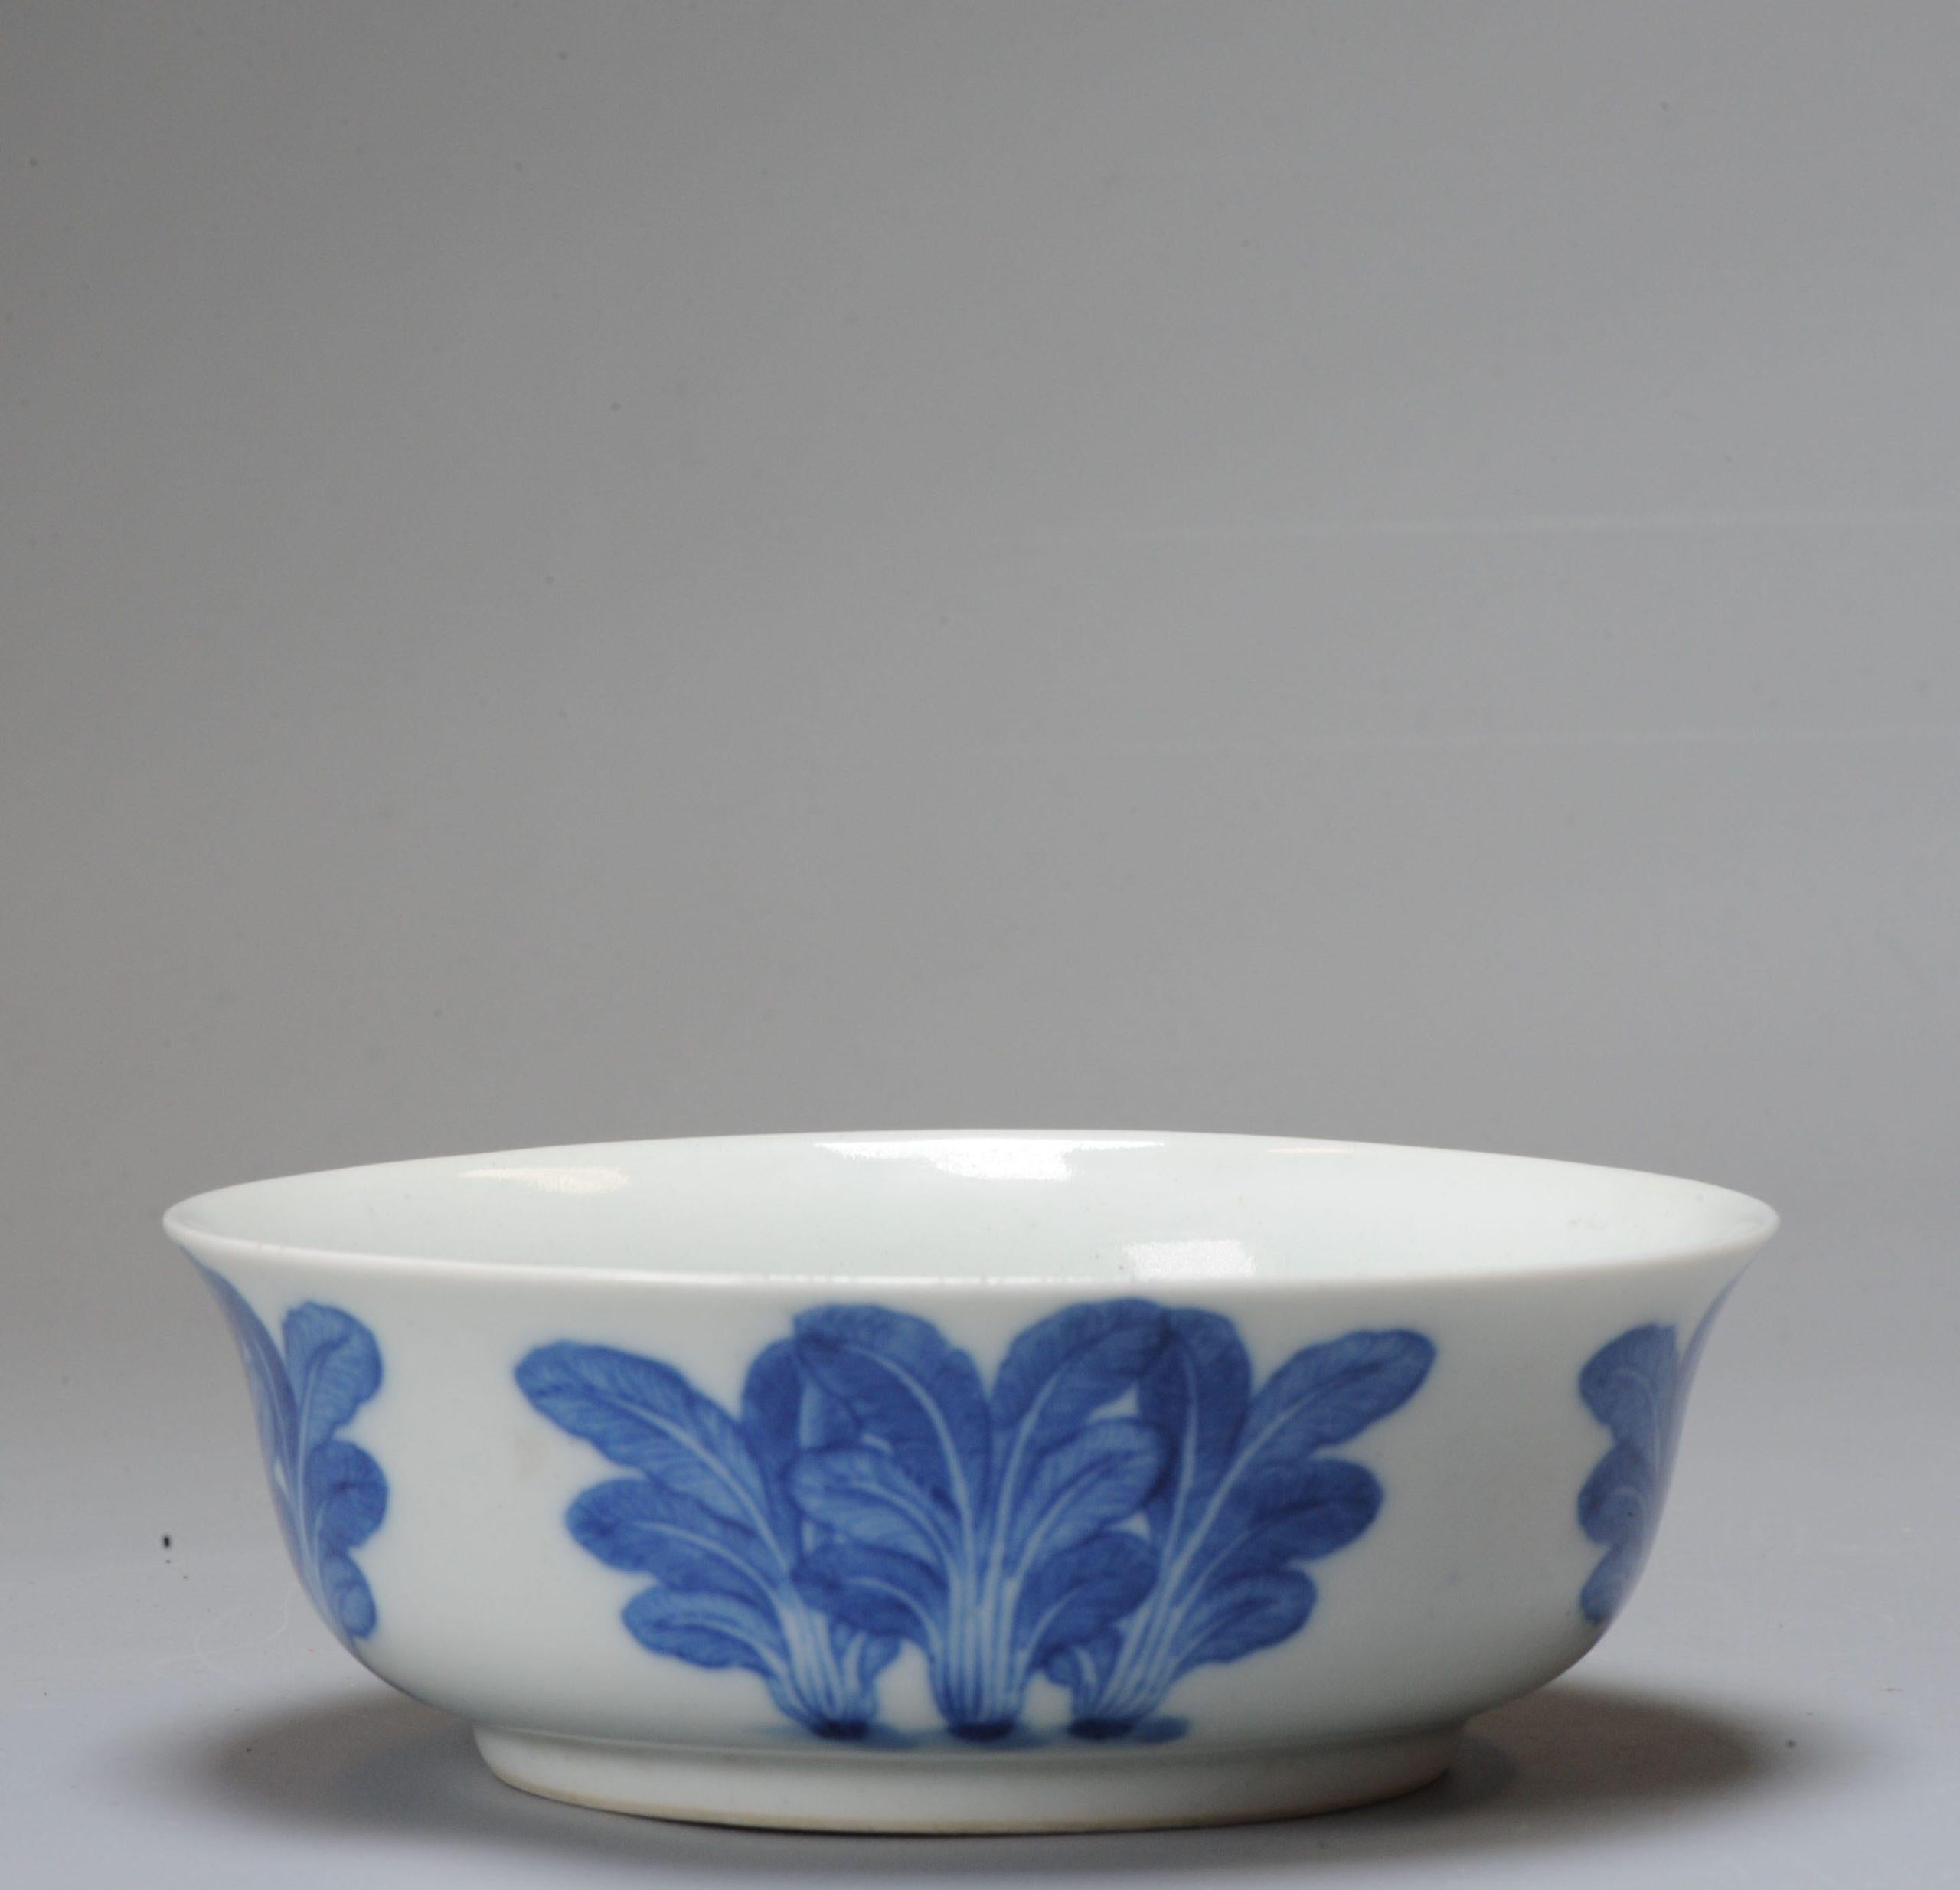 Description

An absolute top quality Paksoi leaf bowl for the Thai market. 19C Daoguang period Chinese porcelain.

Condition
Perfect. Size 133x47mm DiameterxHeight

Period
19th century Qing (1661 - 1912).